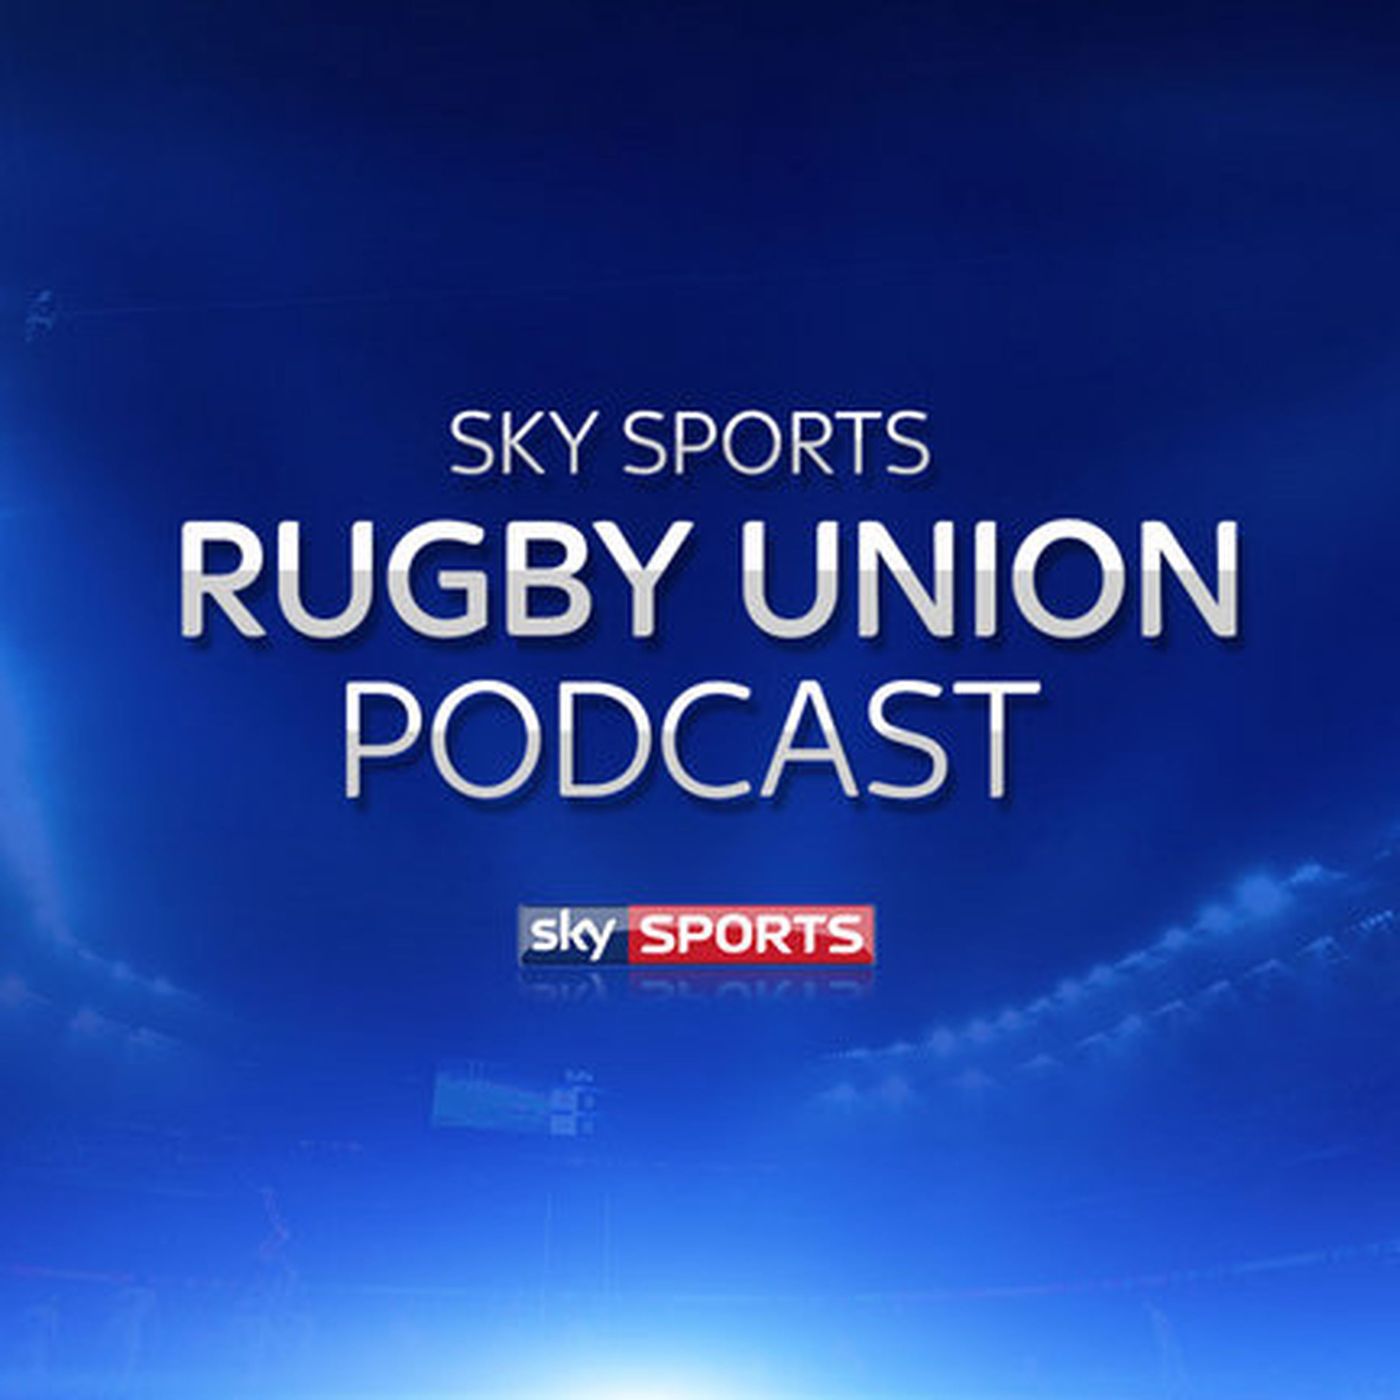 Sky Sports Rugby Union Podcast - 9th Sept